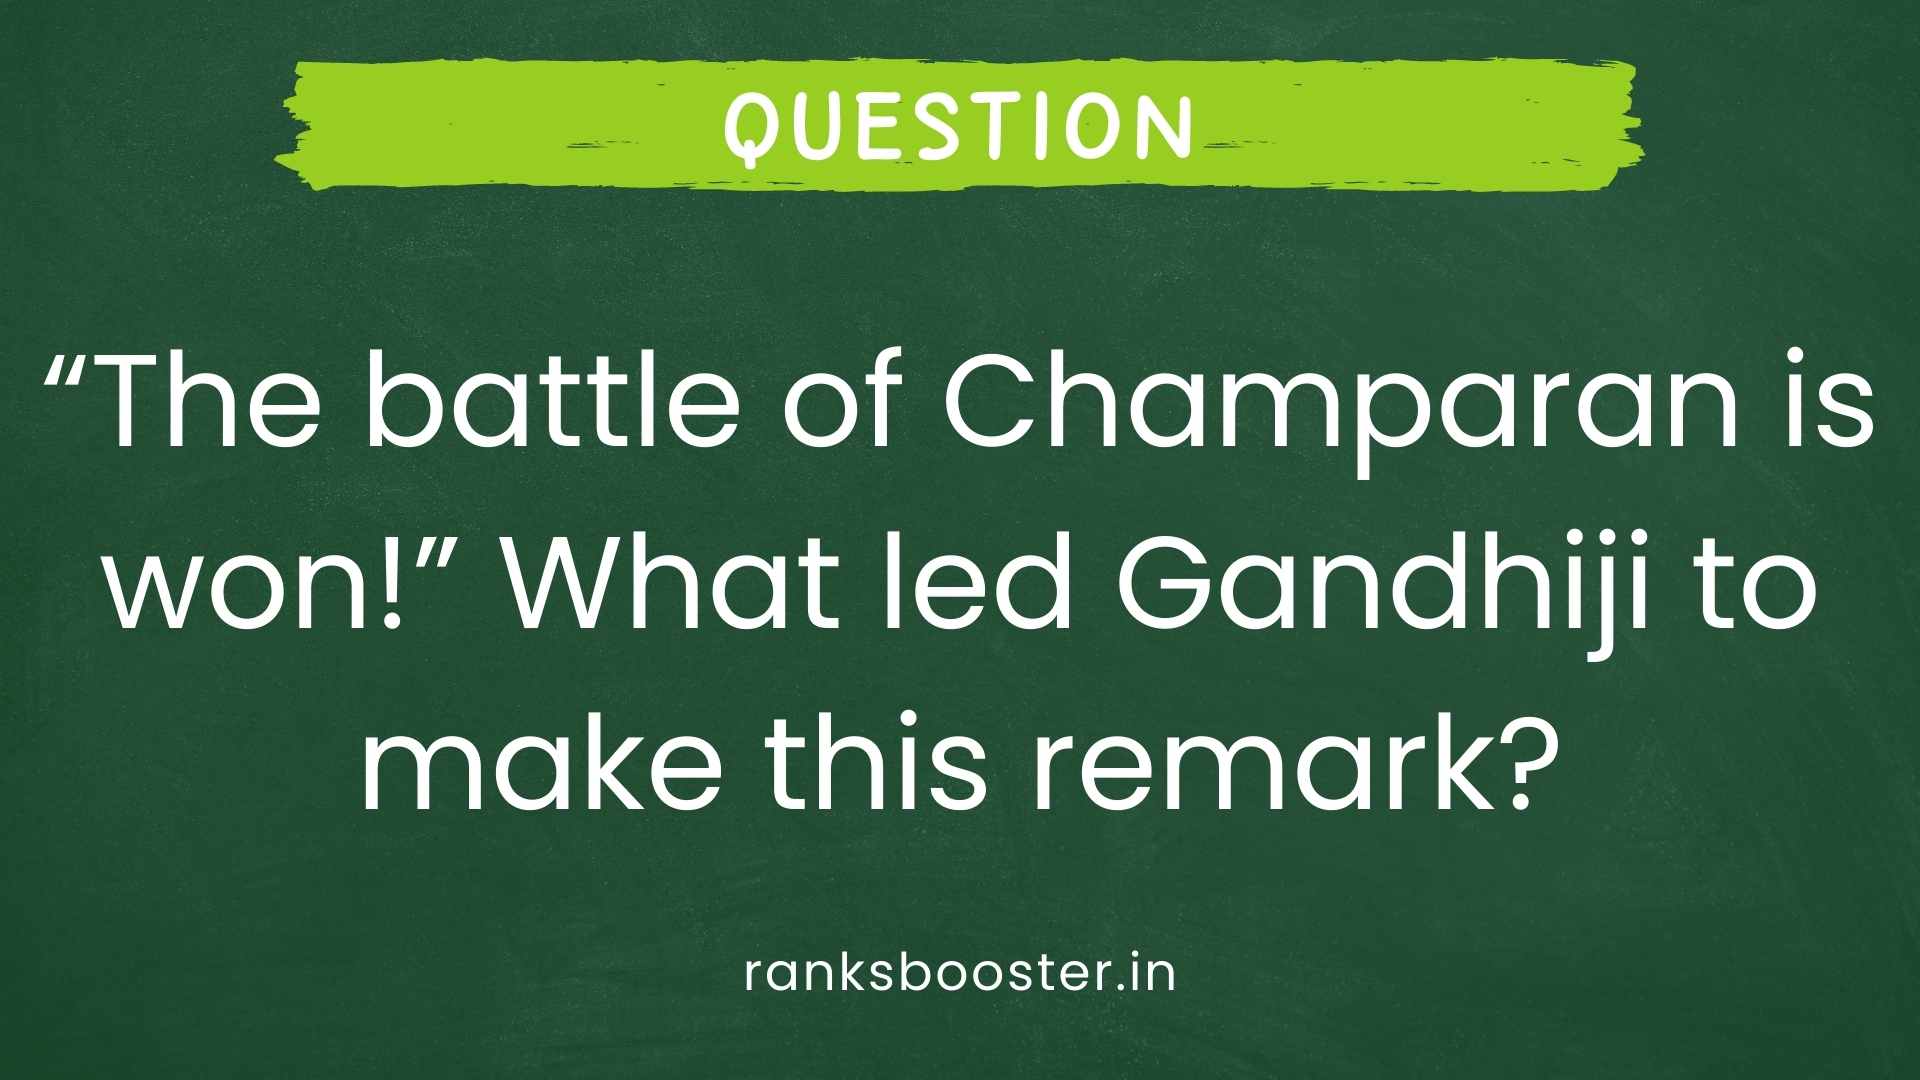 Question: “The battle of Champaran is won!” What led Gandhiji to make this remark? [CBSE (F) 2010]